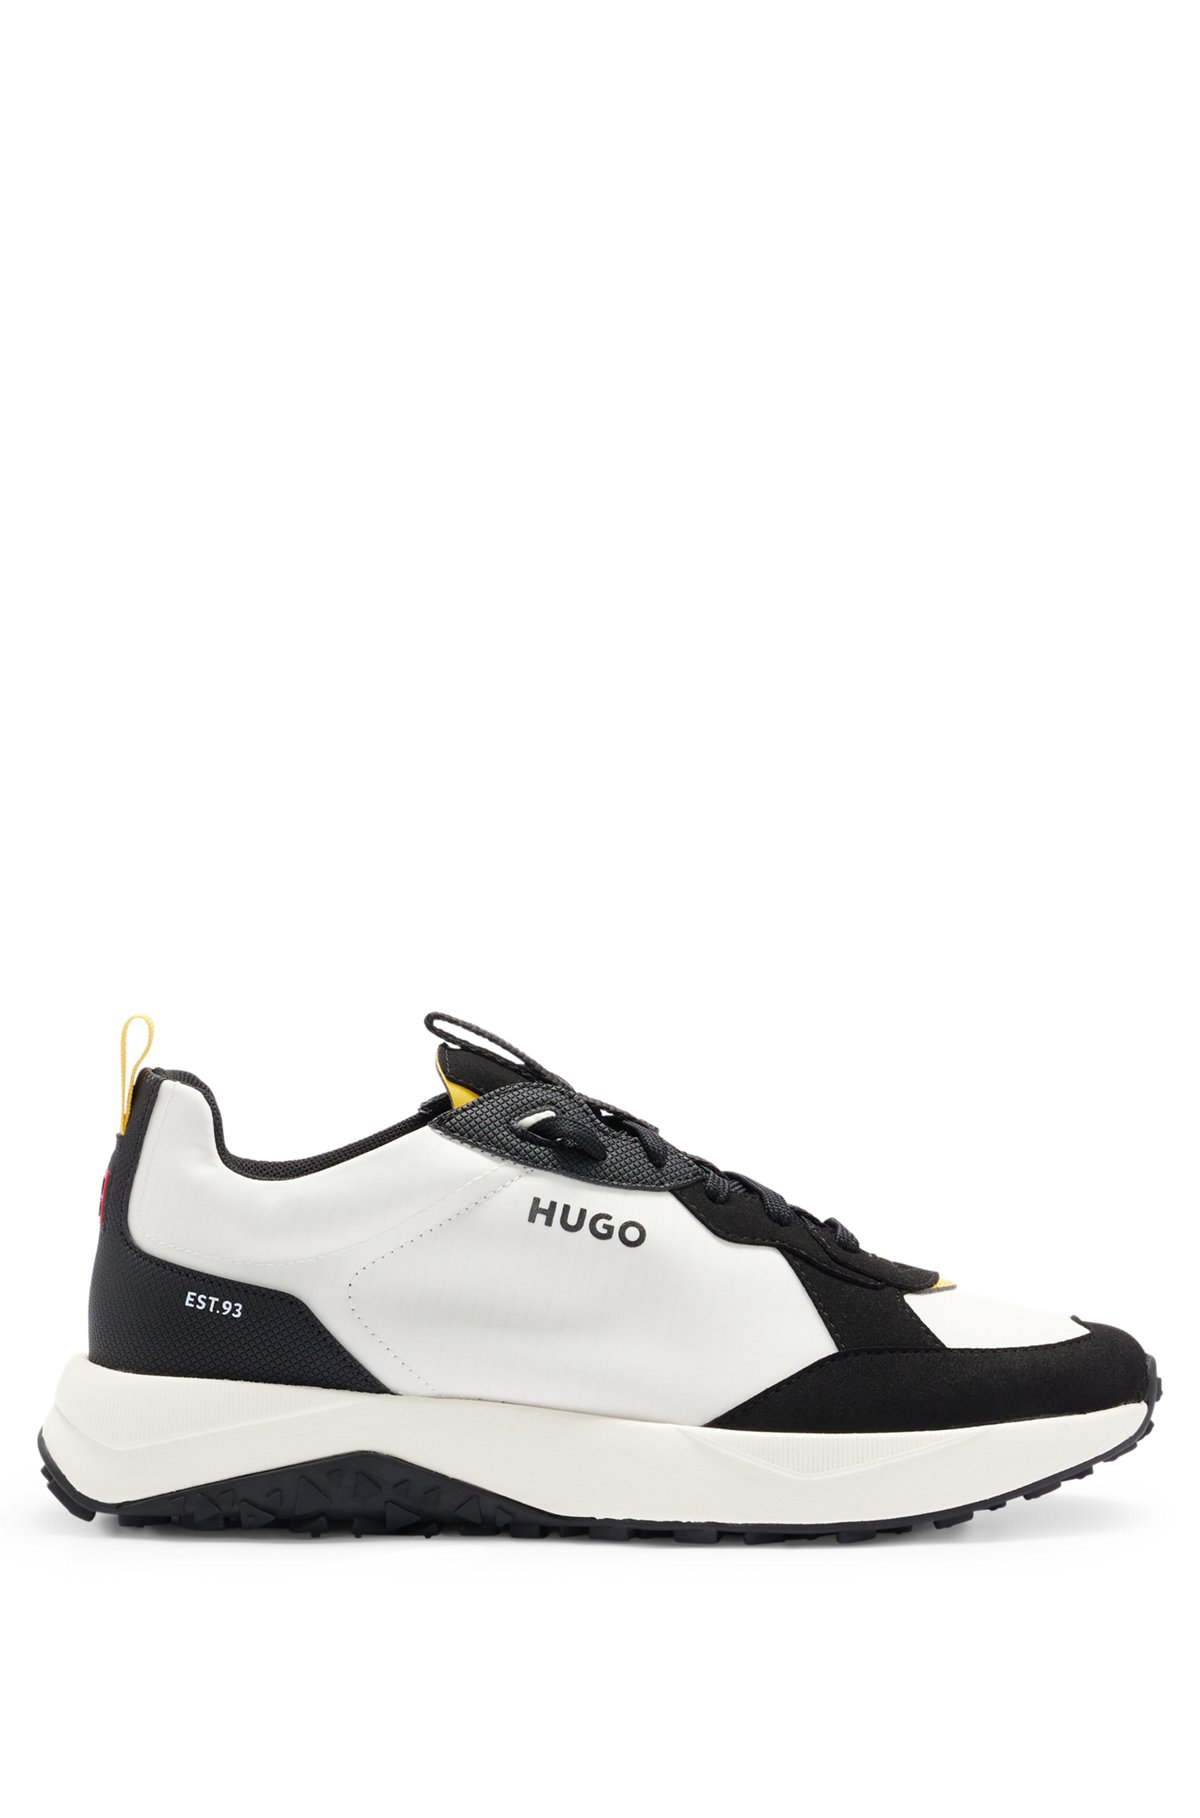 Running-style trainers in mixed materials with logo details, White